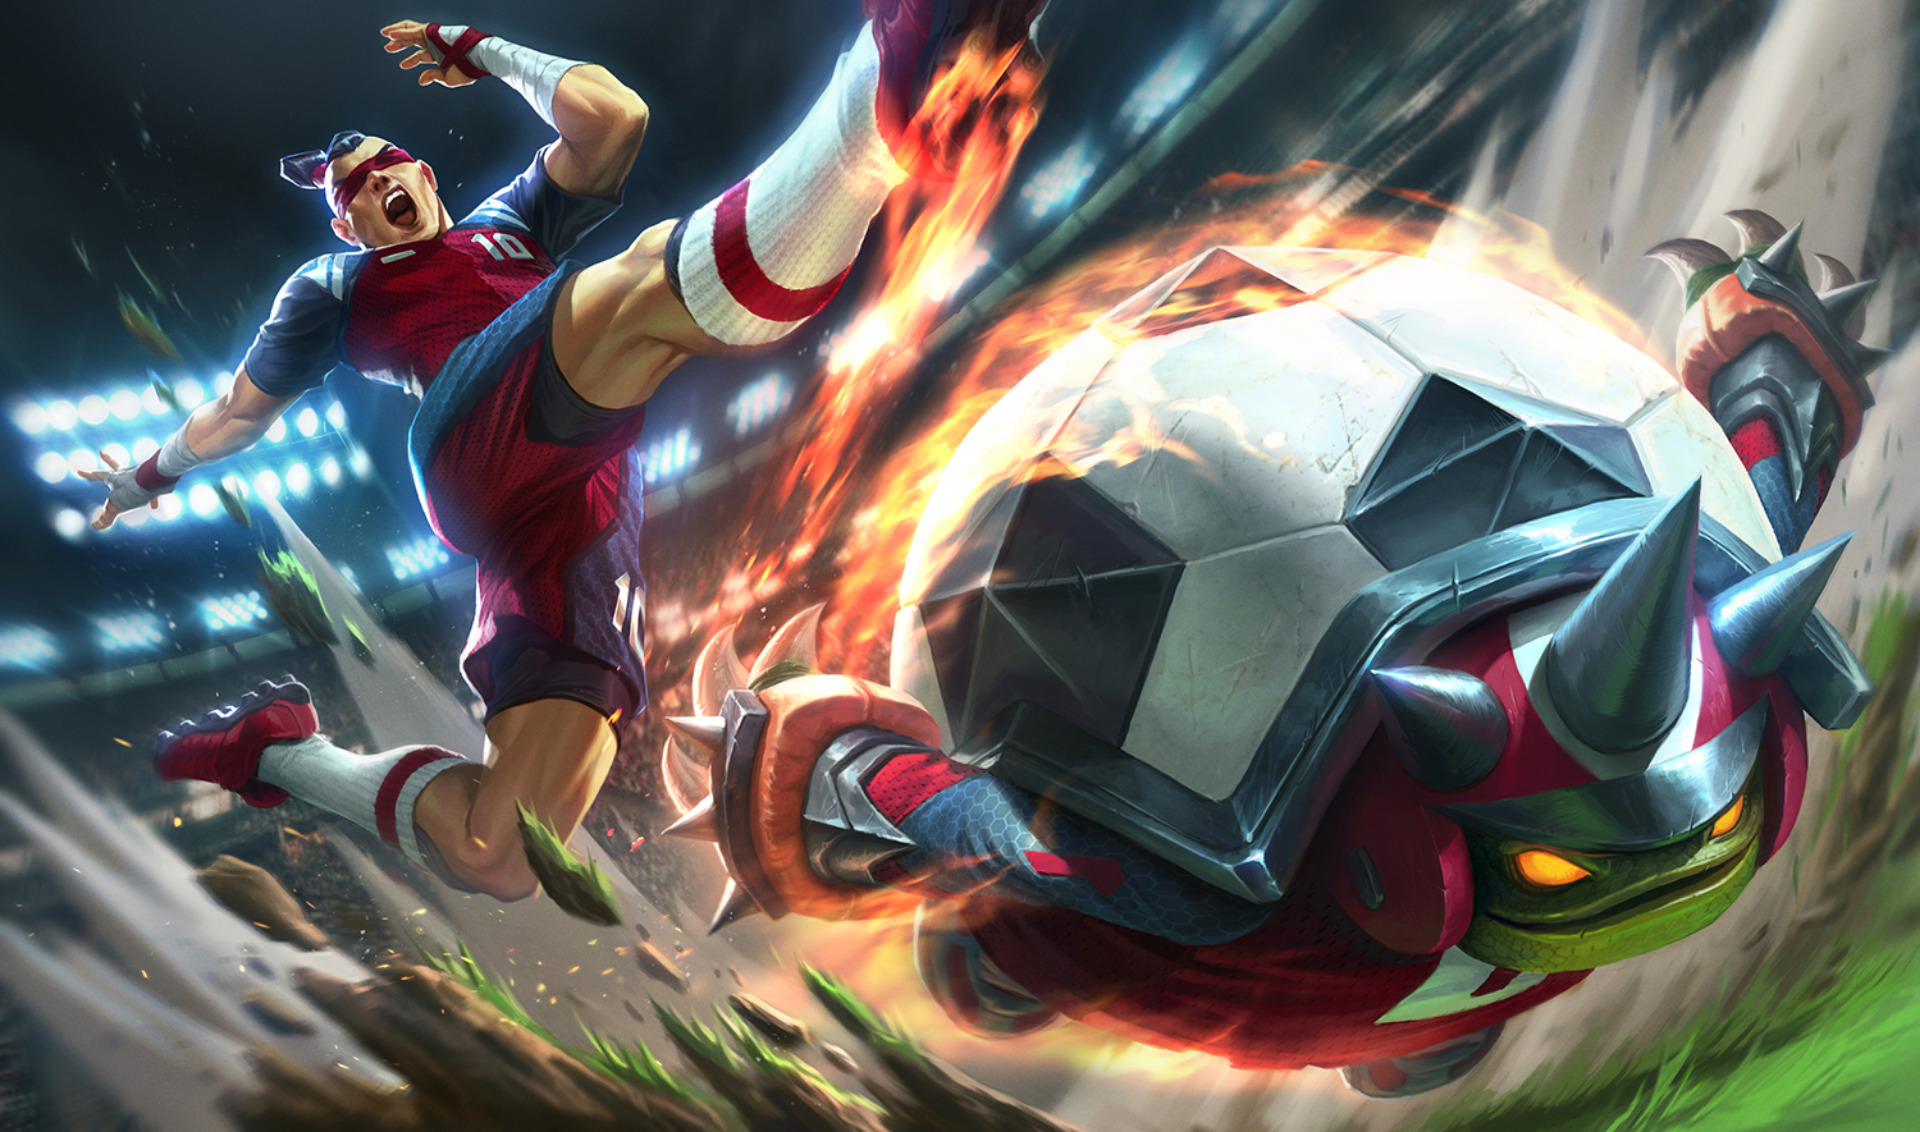 video game, league of legends, lee sin (league of legends), rammus (league of legends)